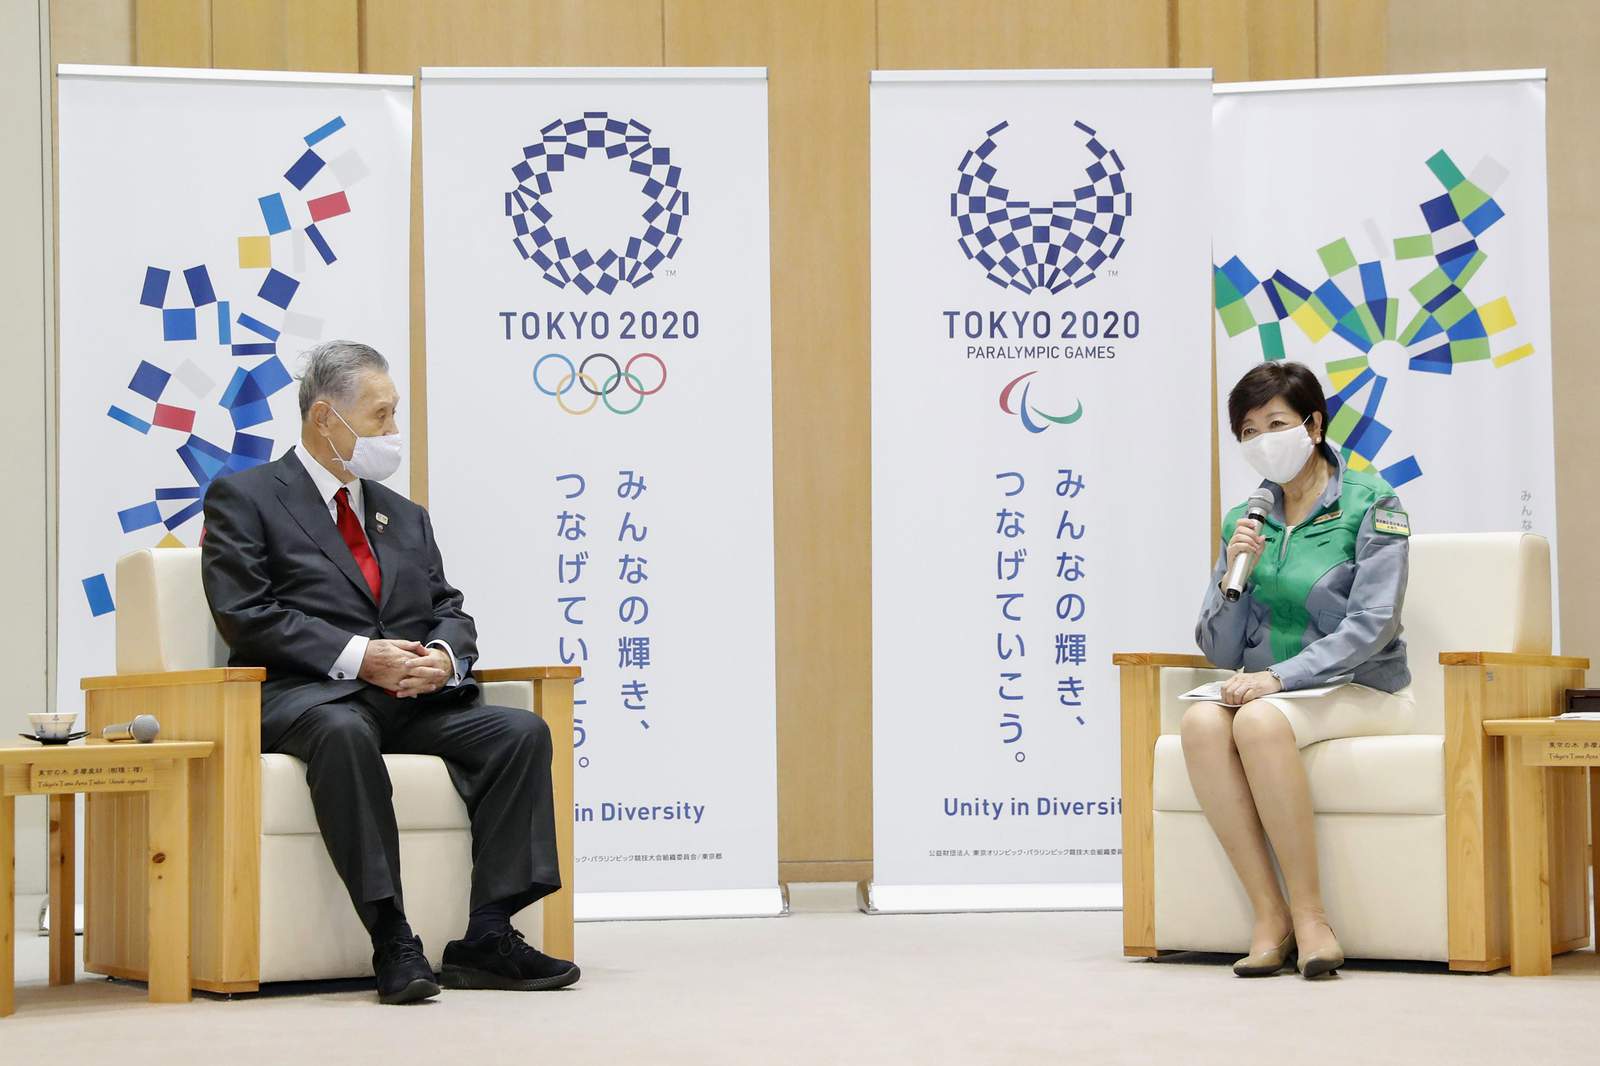 Tokyo Olympics seek COVID-19 defenses, but what exactly?